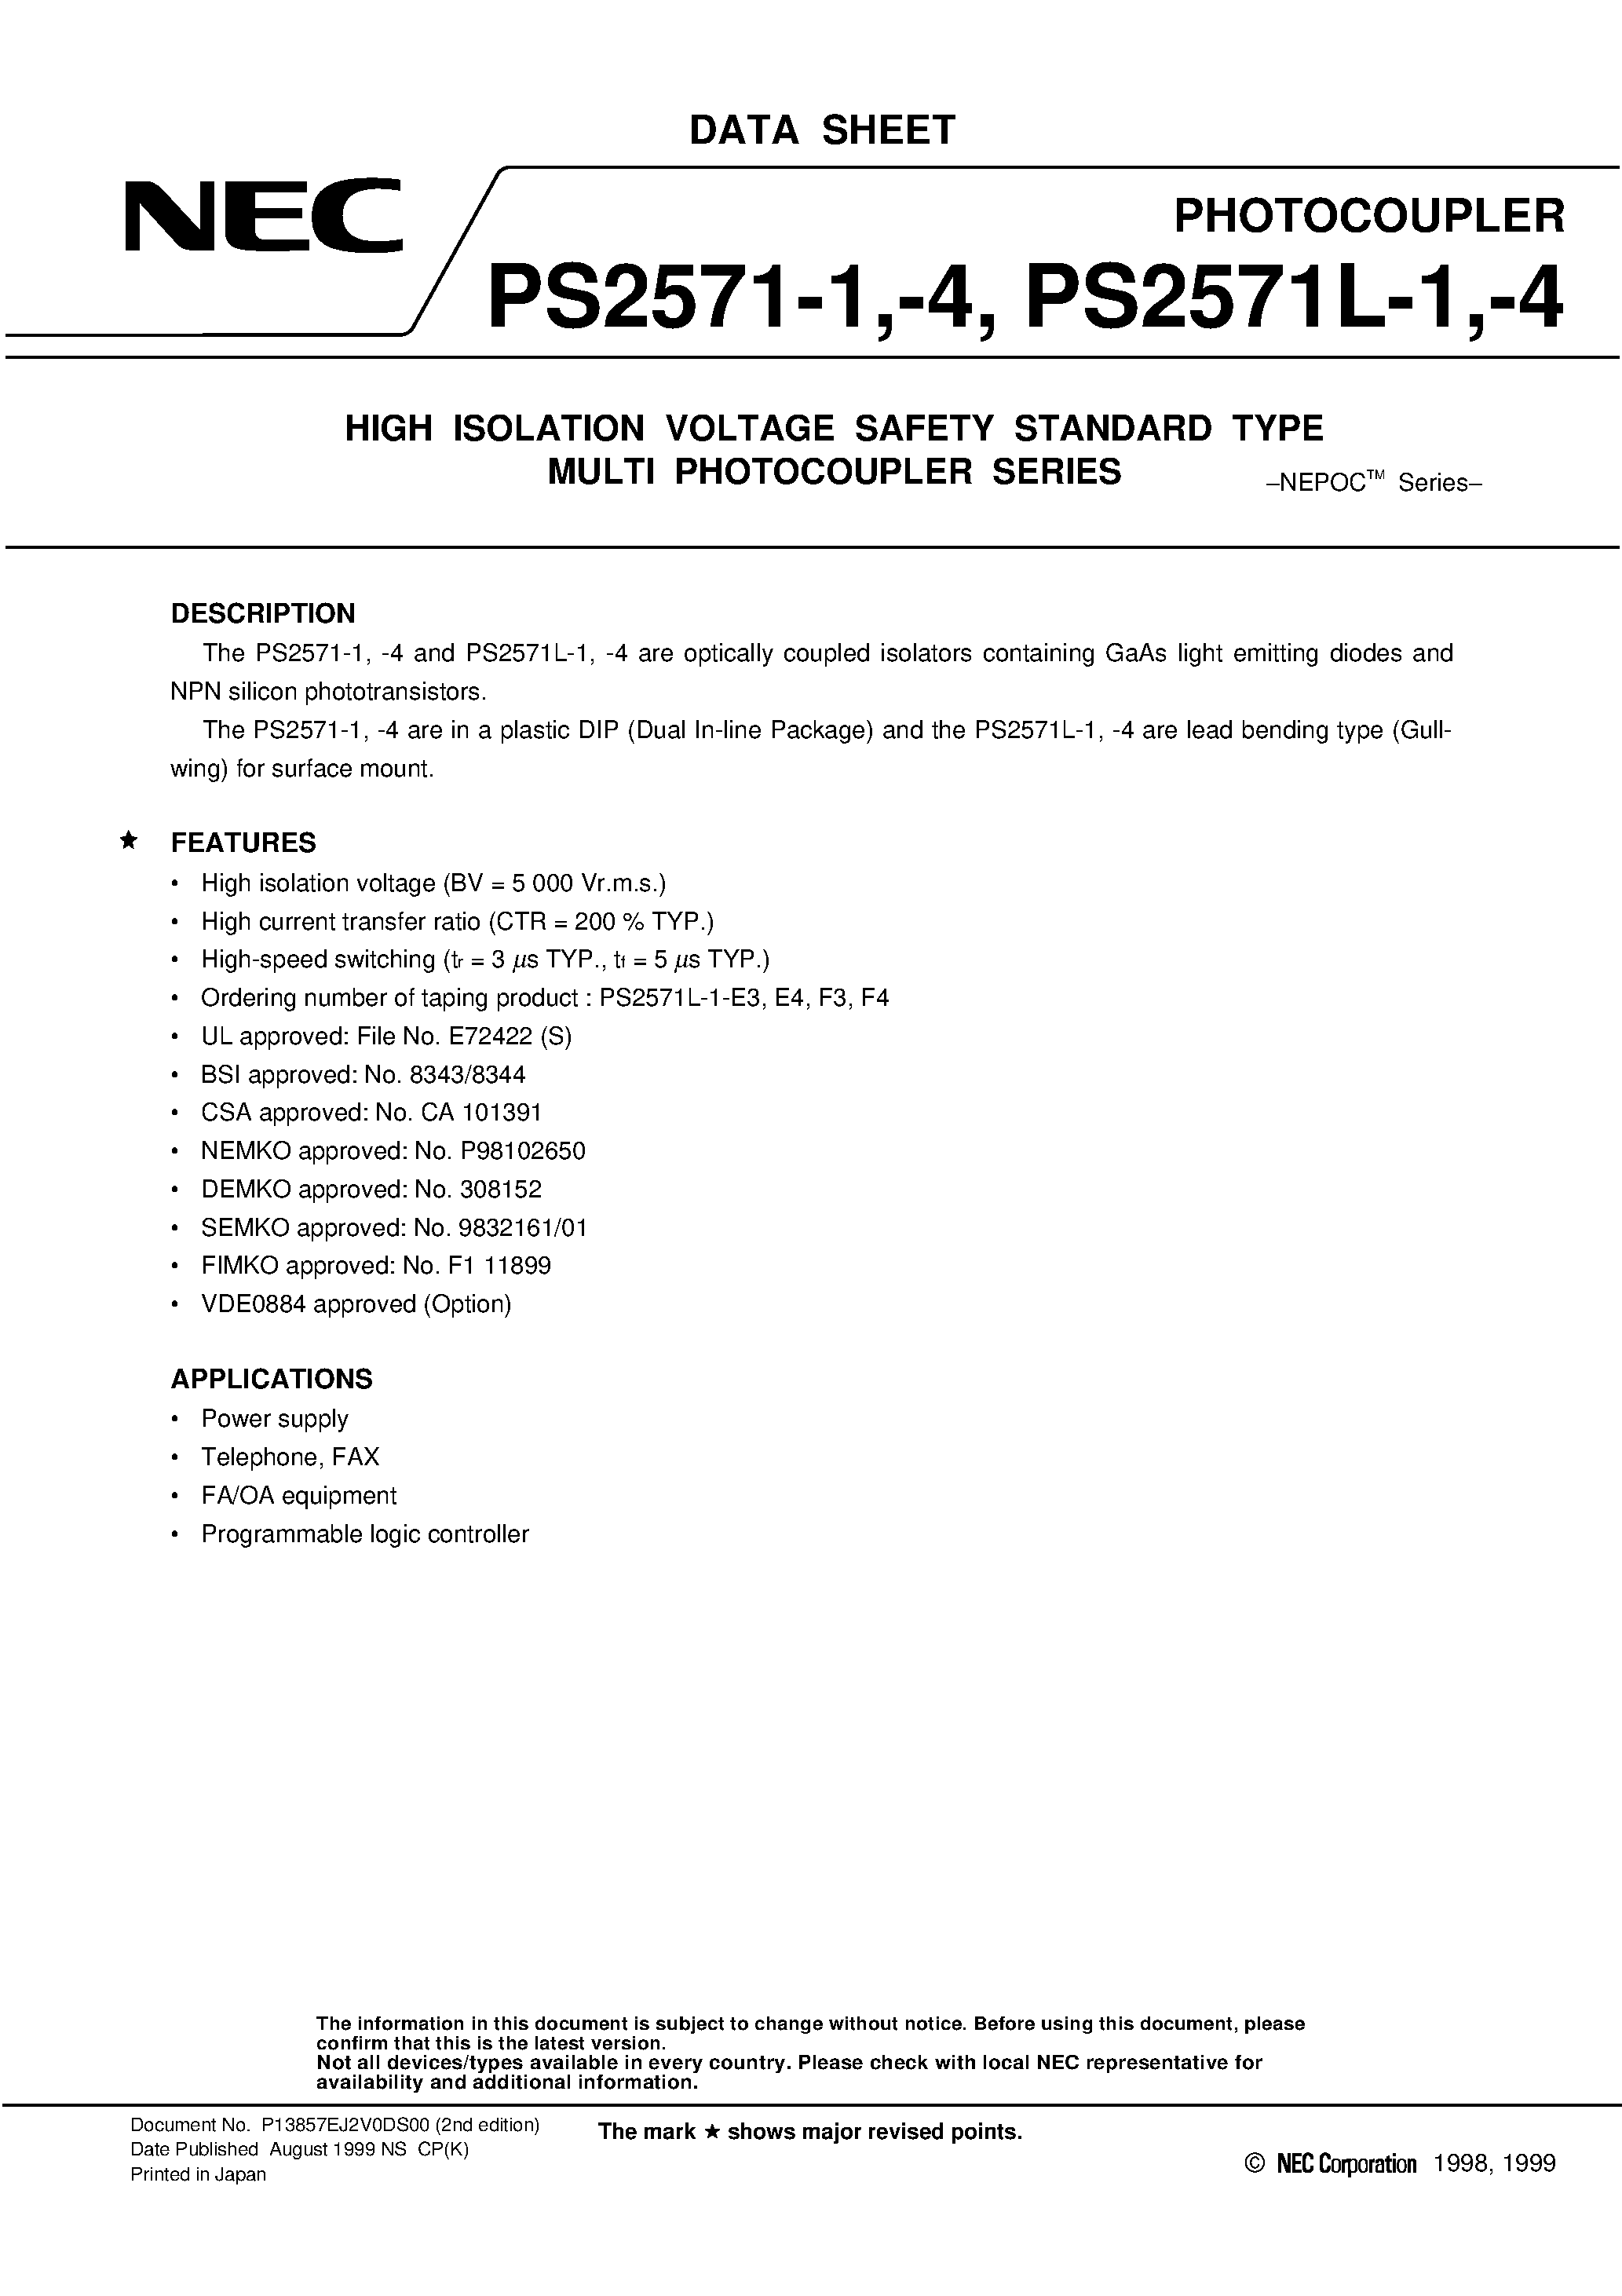 Datasheet PS2571L-1-V-E3 - HIGH ISOLATION VOLTAGE SAFETY STANDARD TYPE MULTI PHOTOCOUPLER SERIES page 1